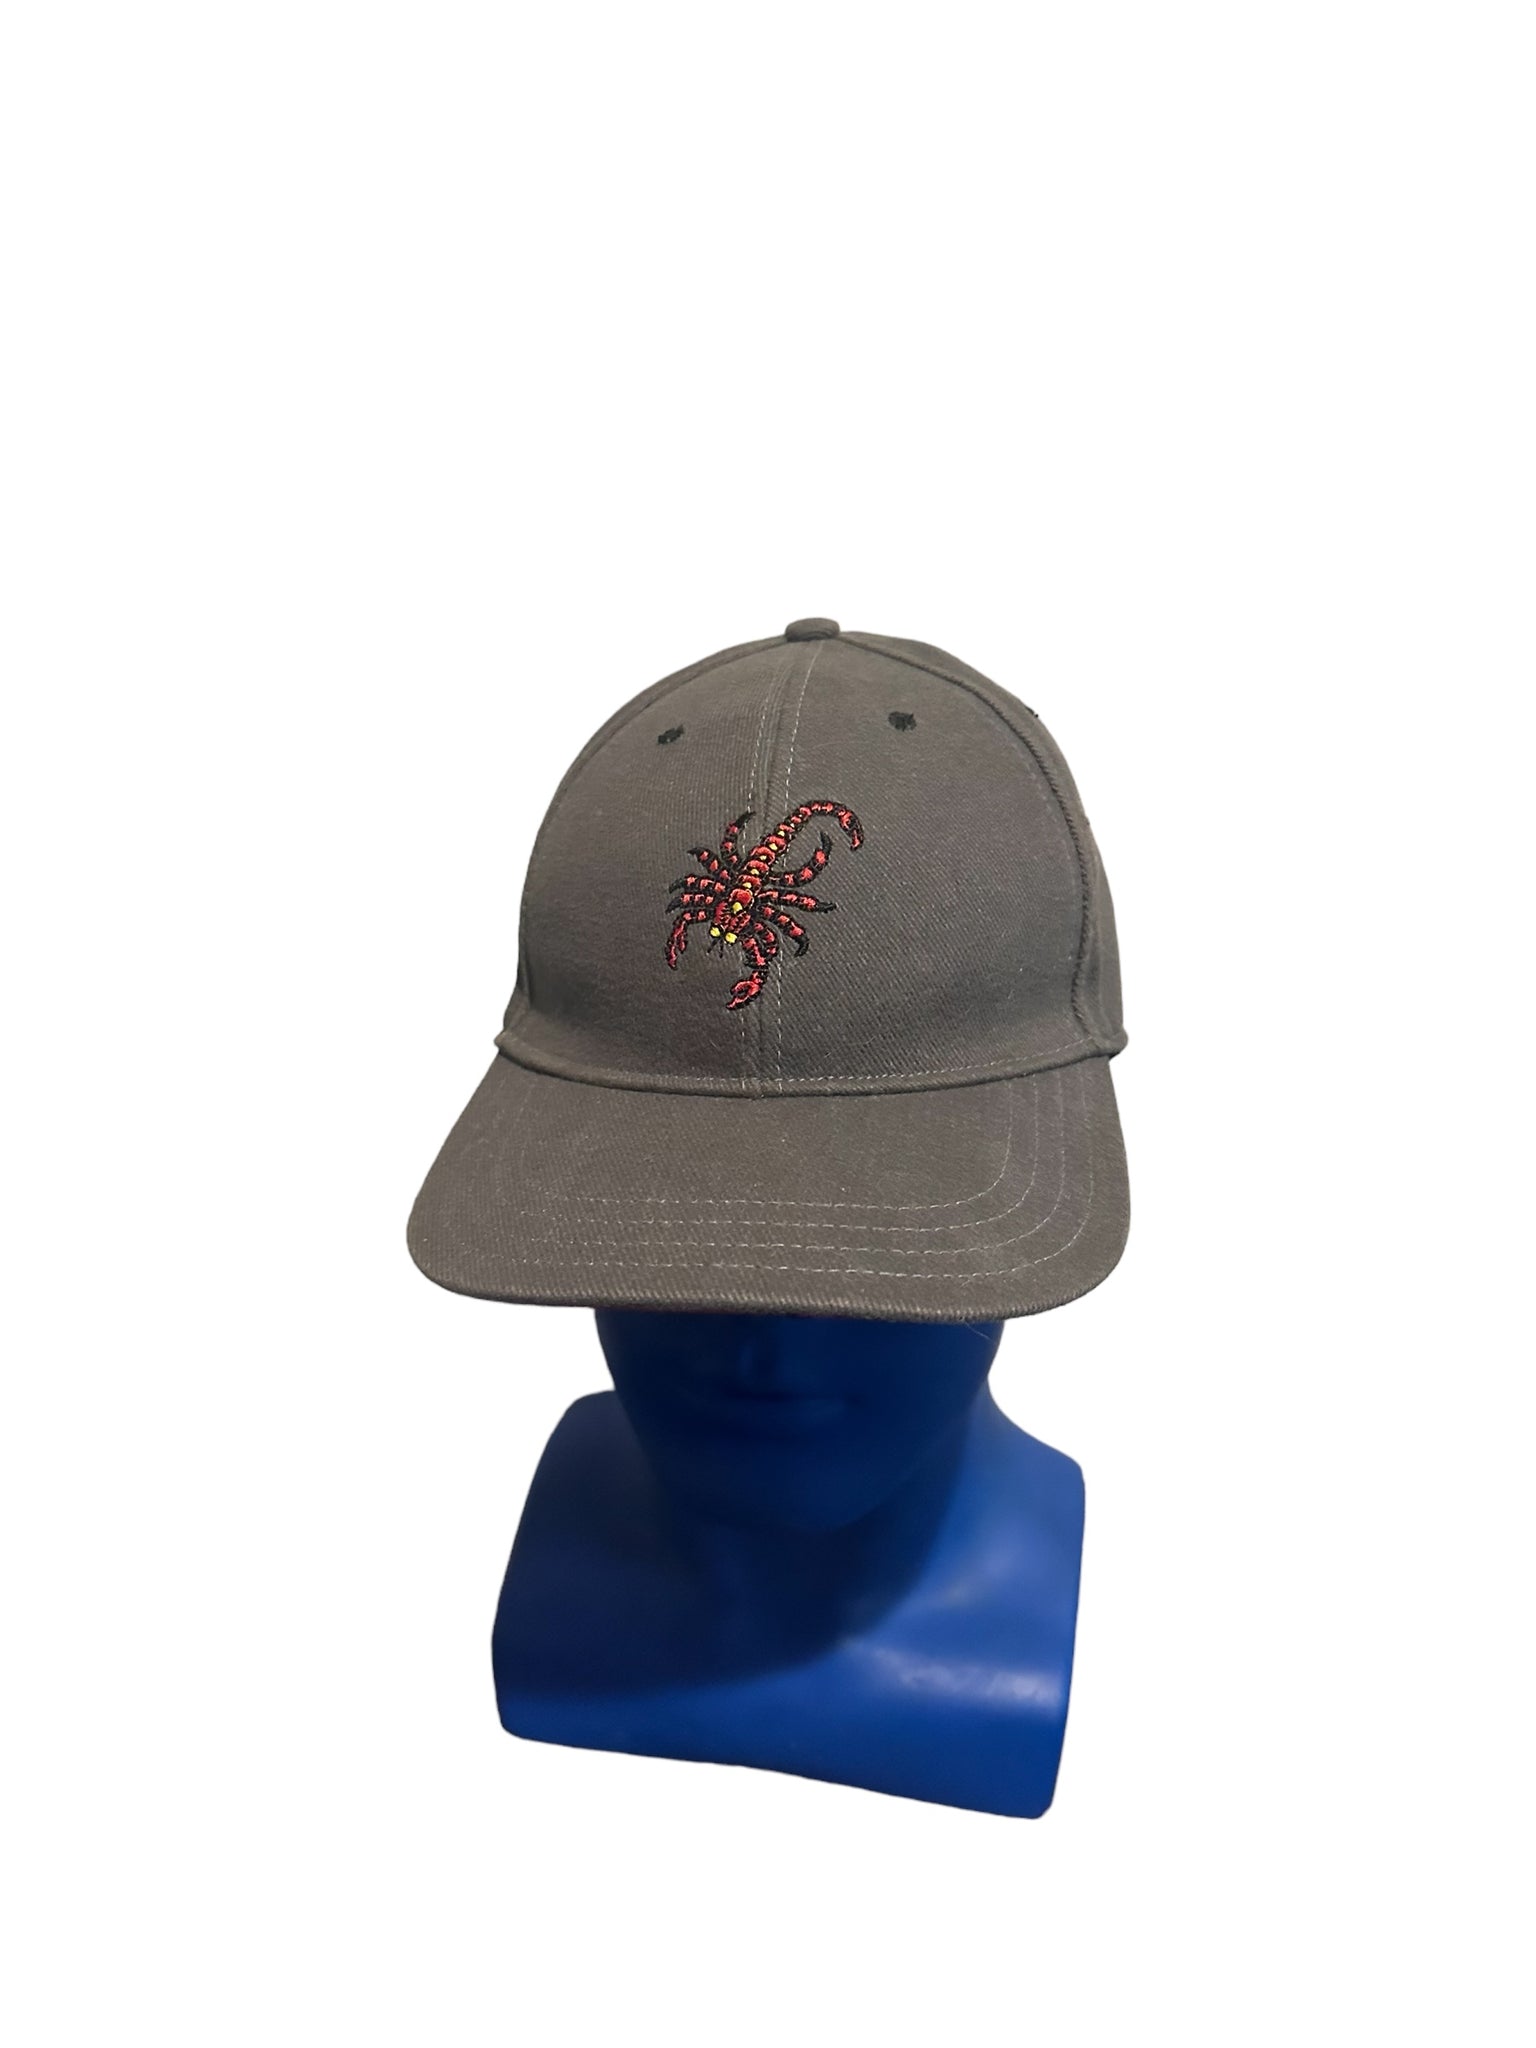 Goorin Bros Embroidered Scorpion Snapback Hat Made In The USA